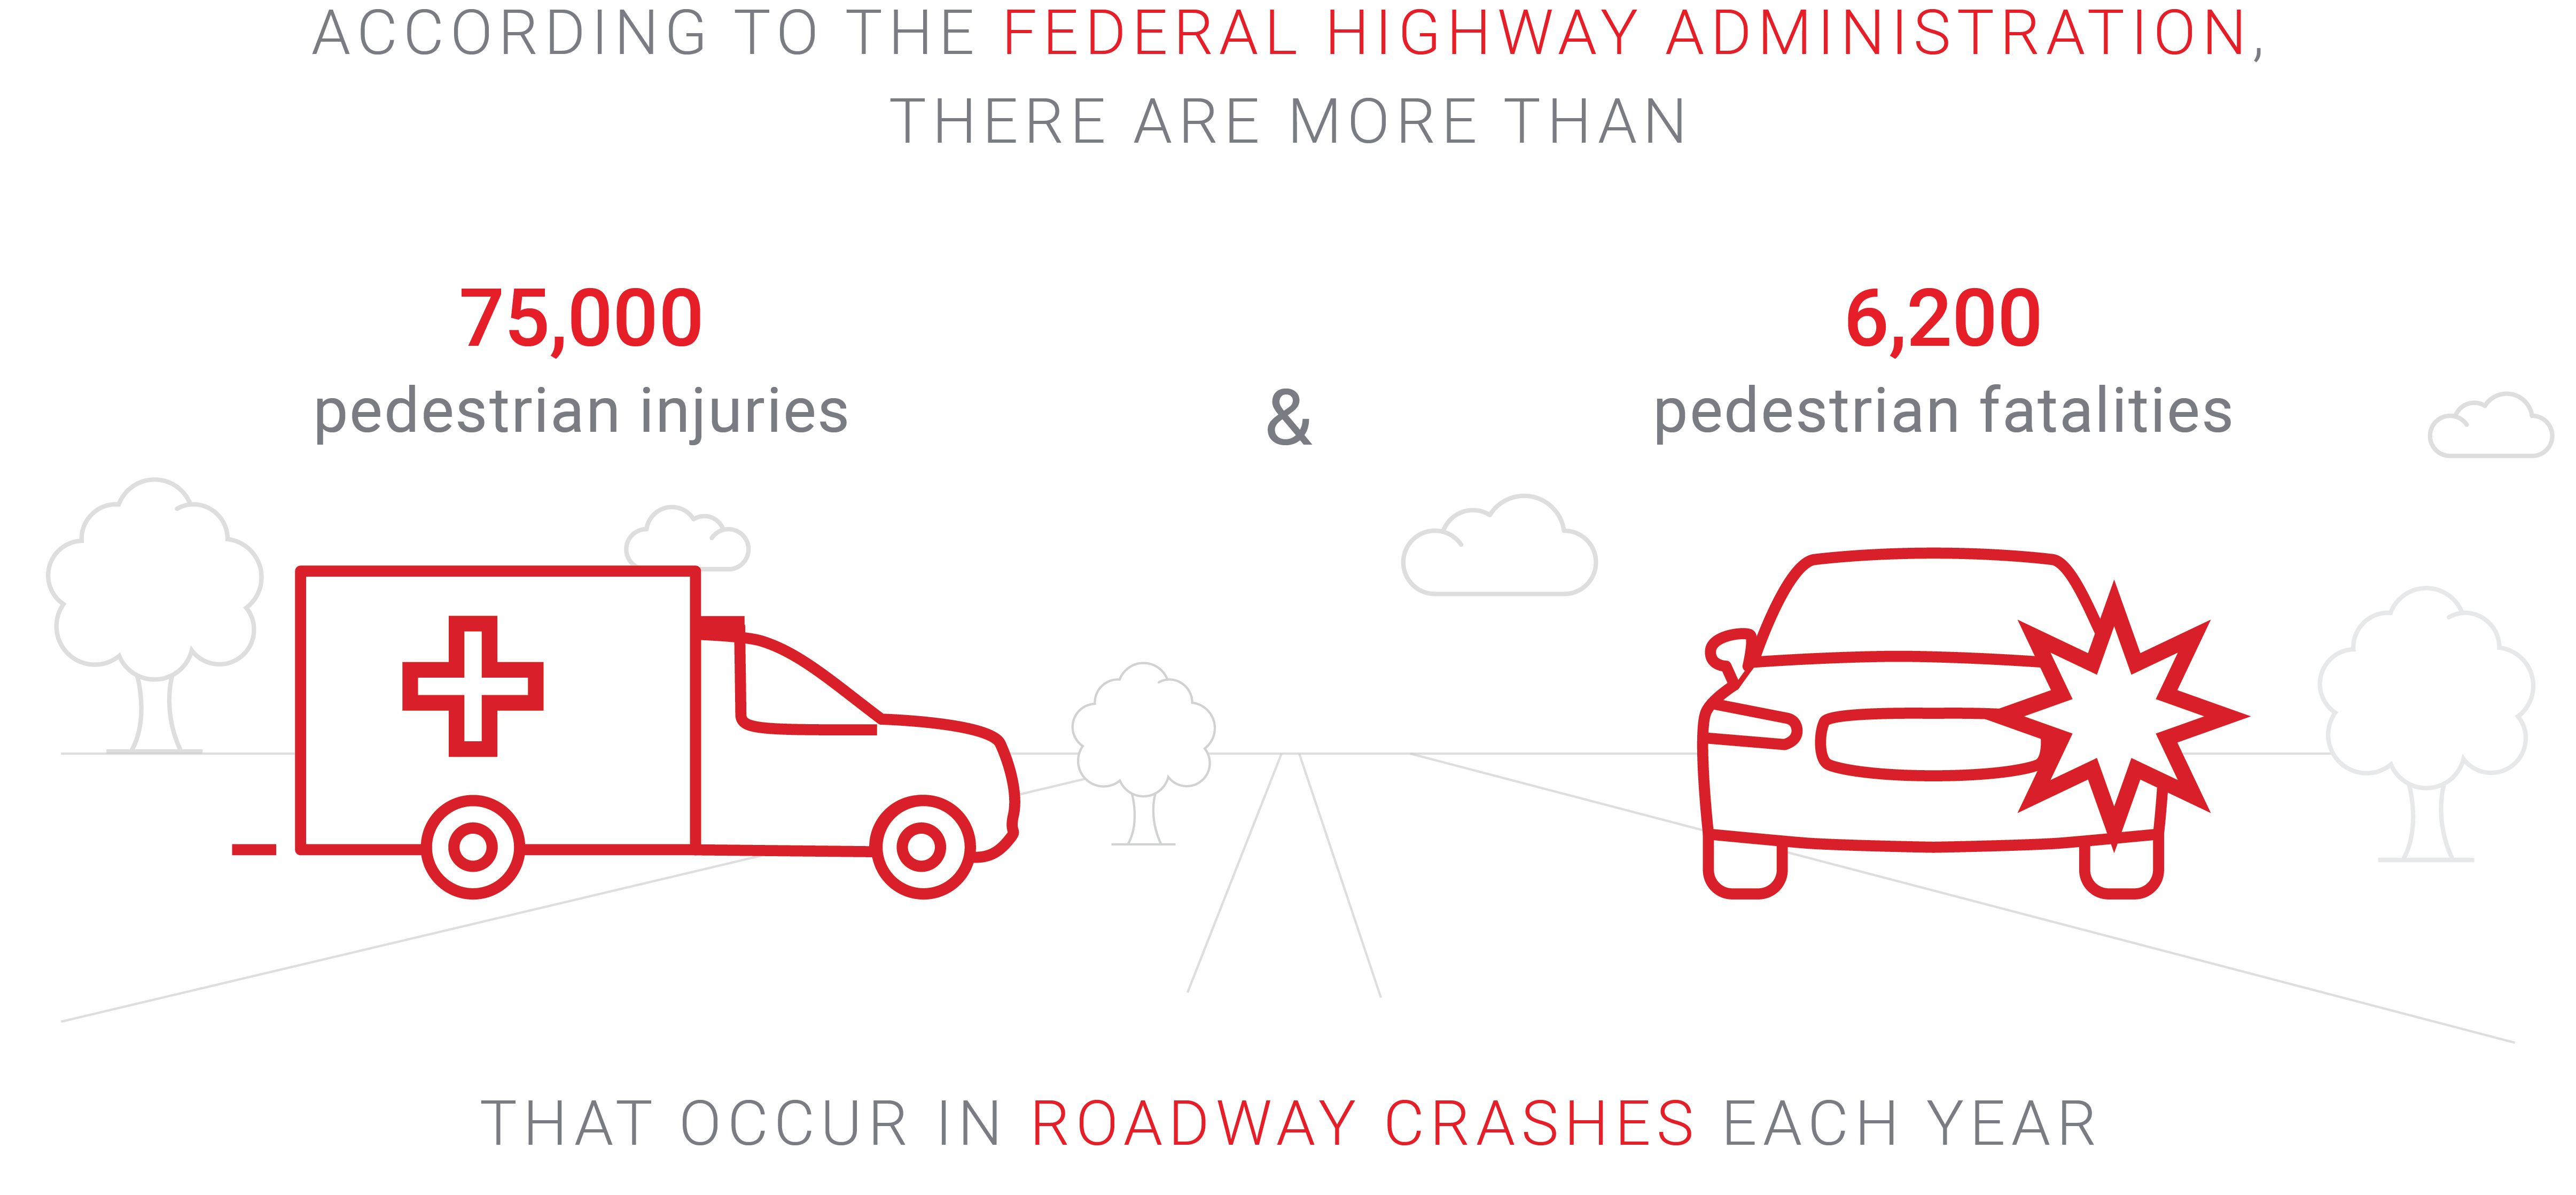 Pedestrian injuries and fatalities